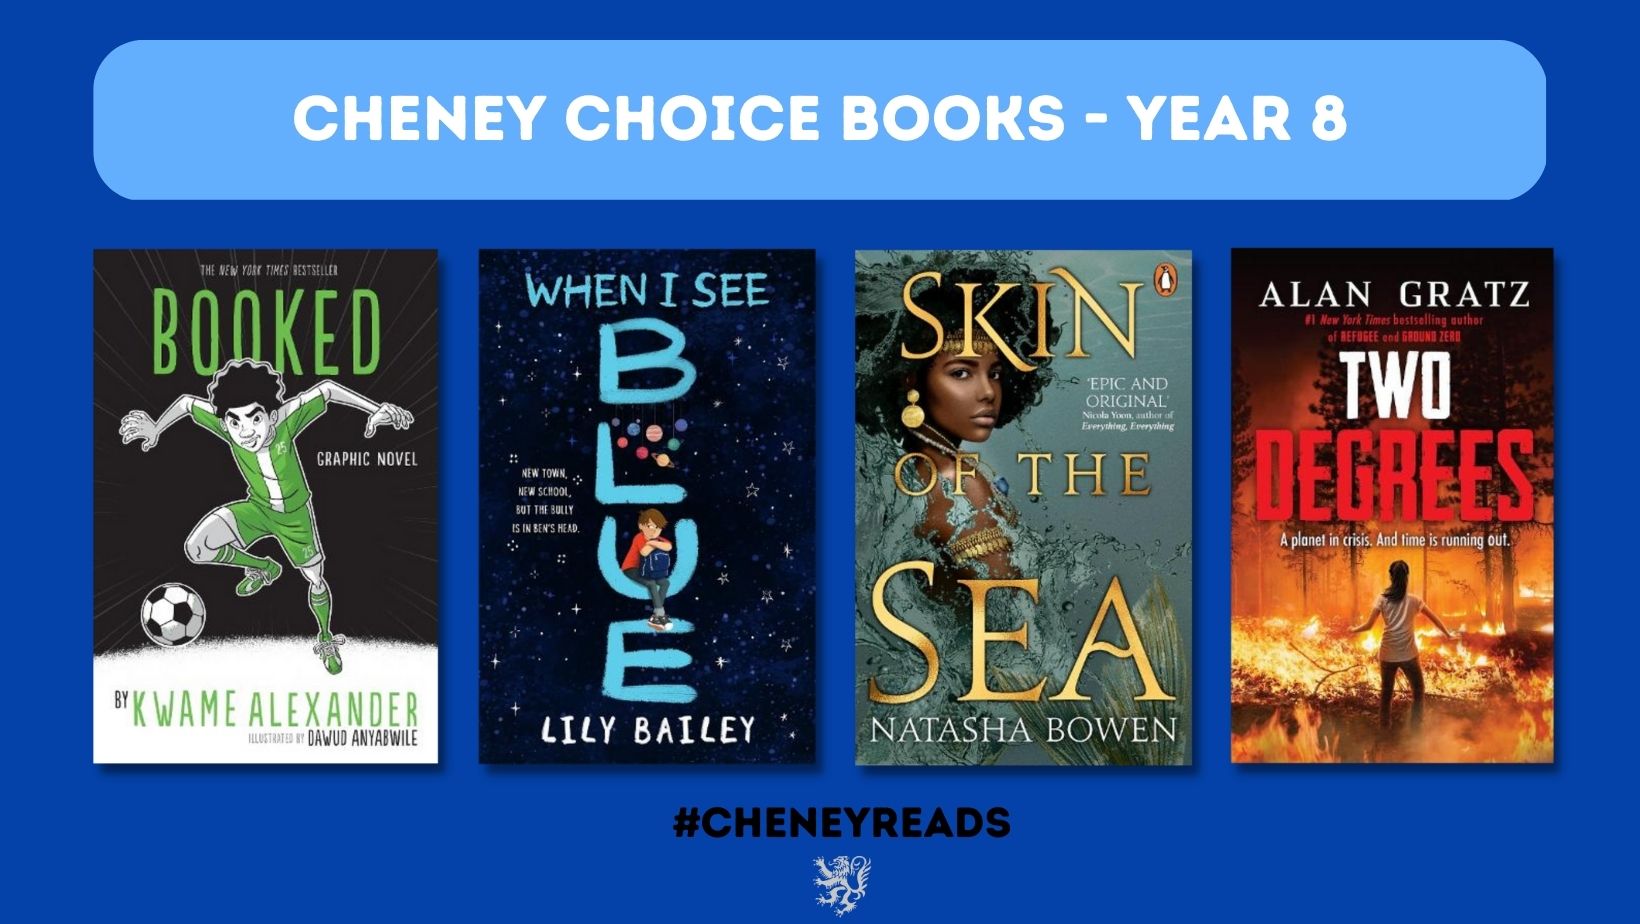 Cheney Choice book covers 2023 Year 8